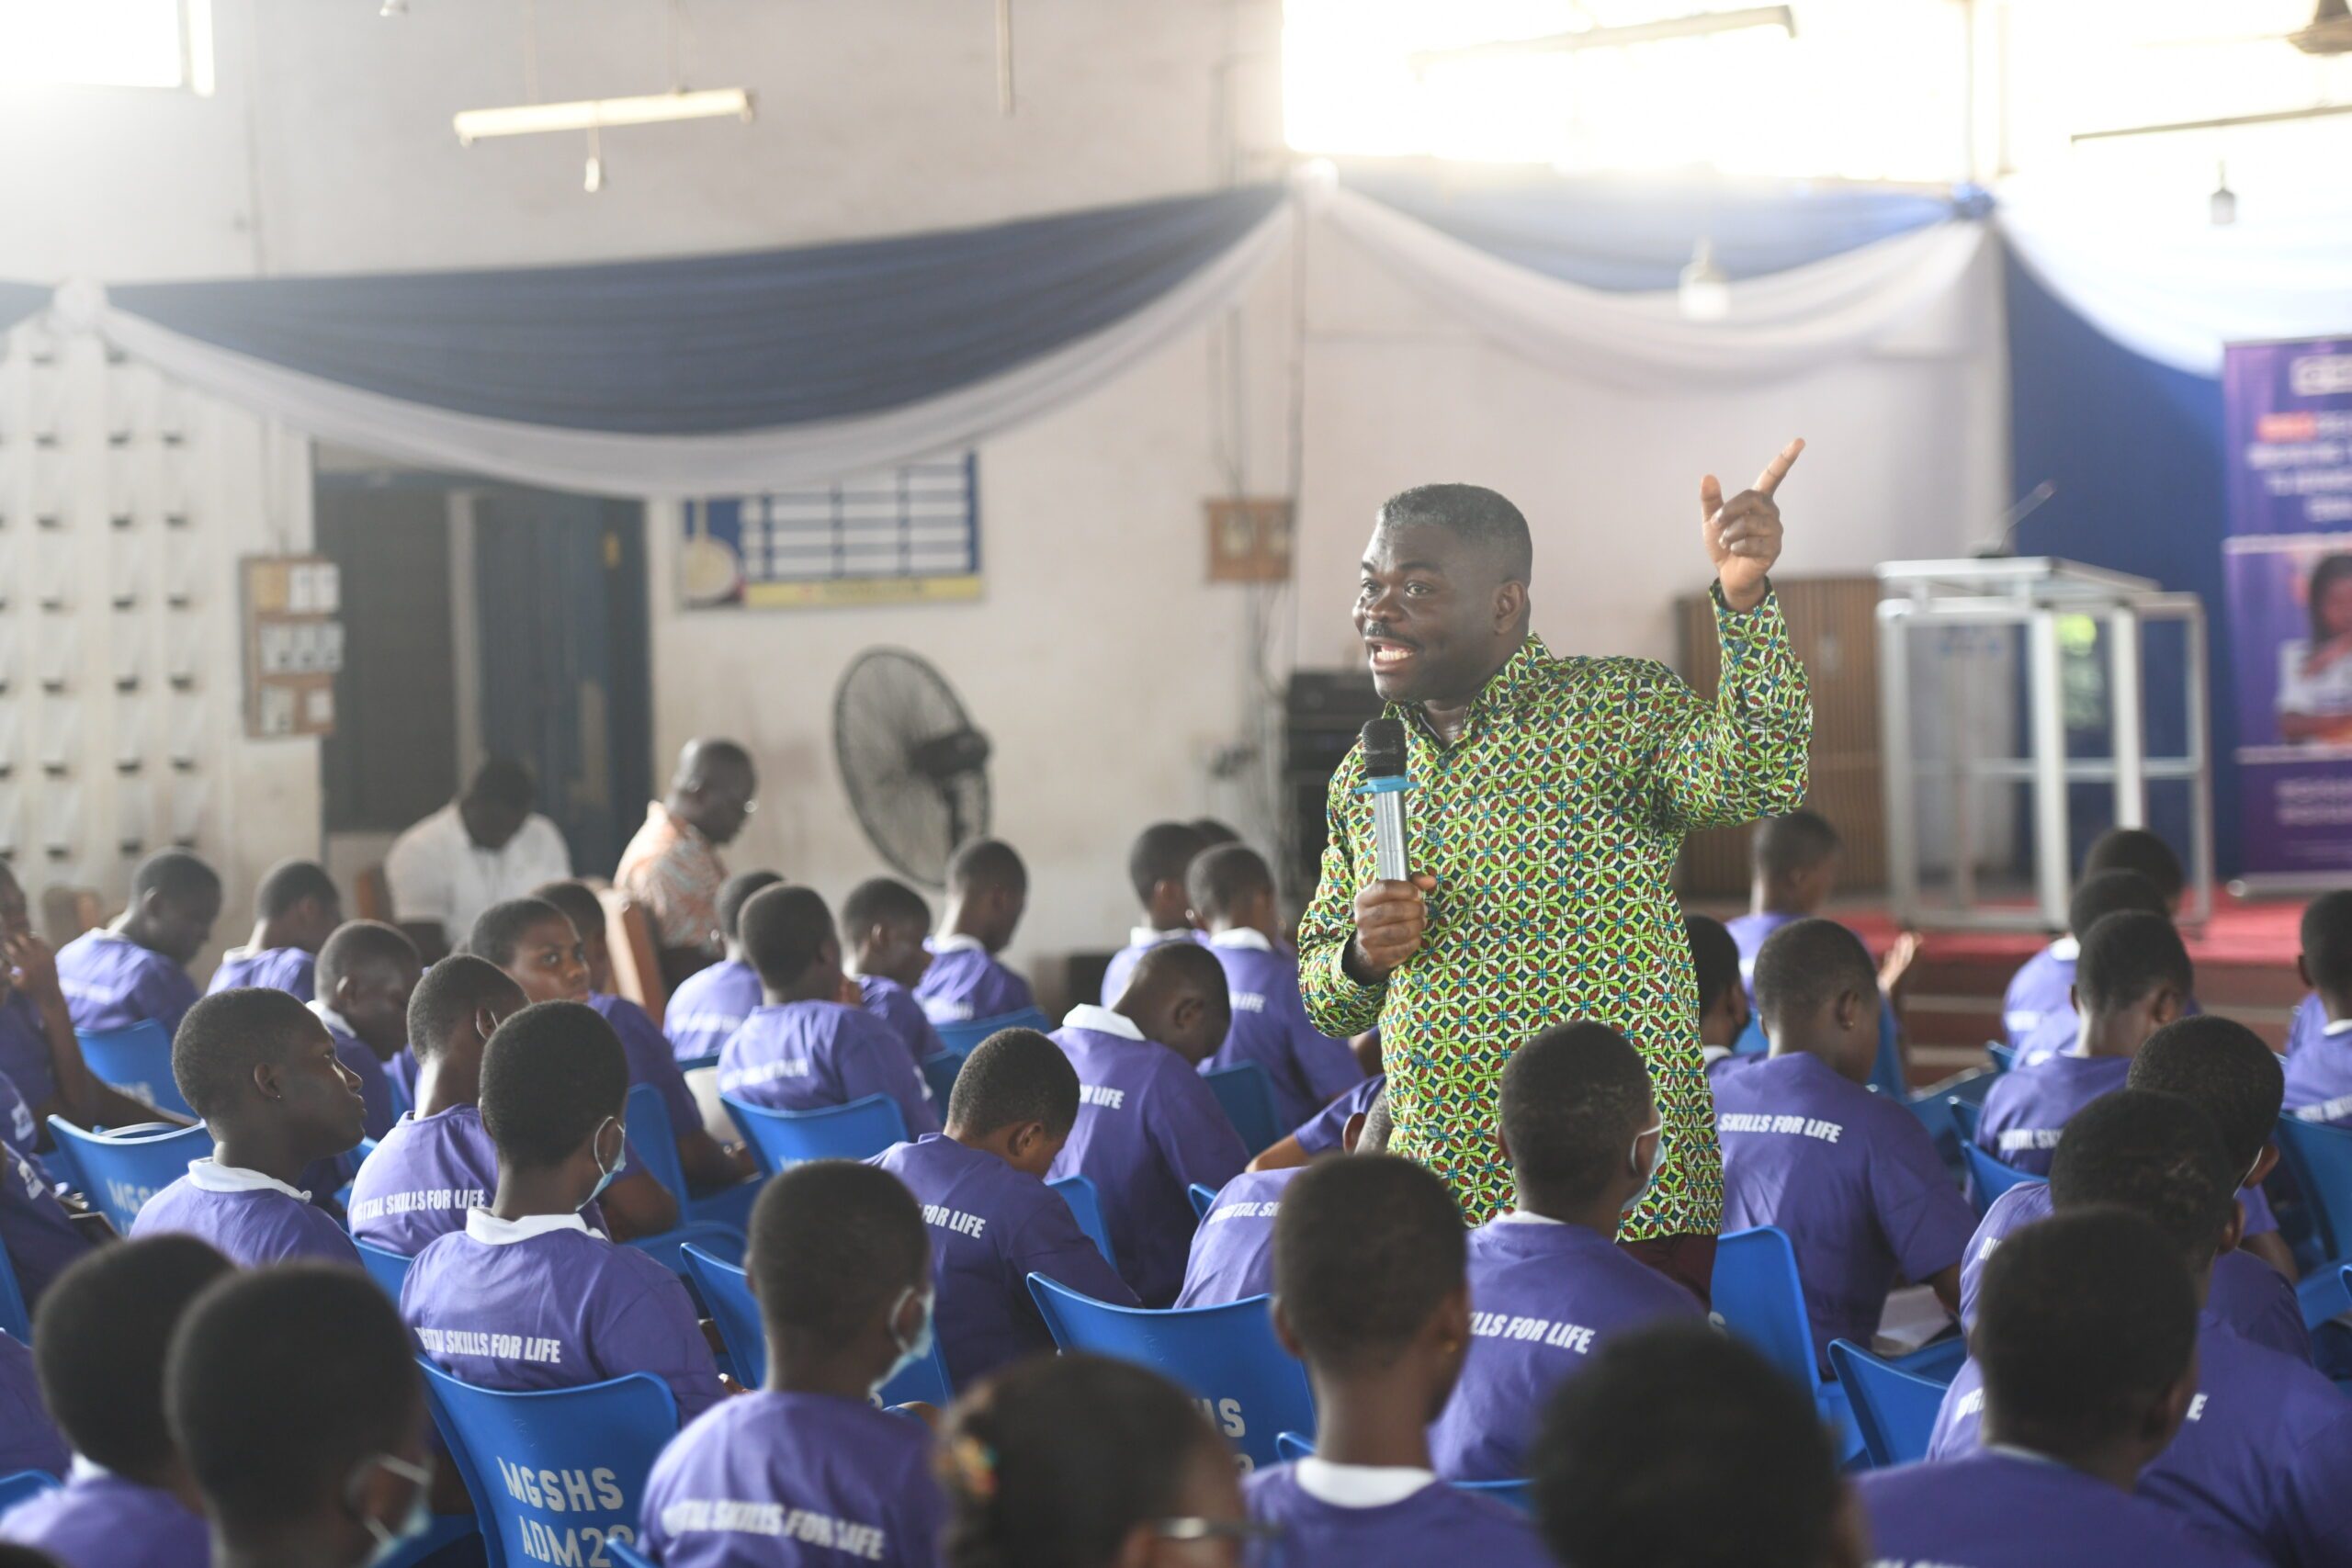 Herbert Gustav Yankson, cybersecurity expert and the facilitator of the Girls in ICT Day event talking to the girls